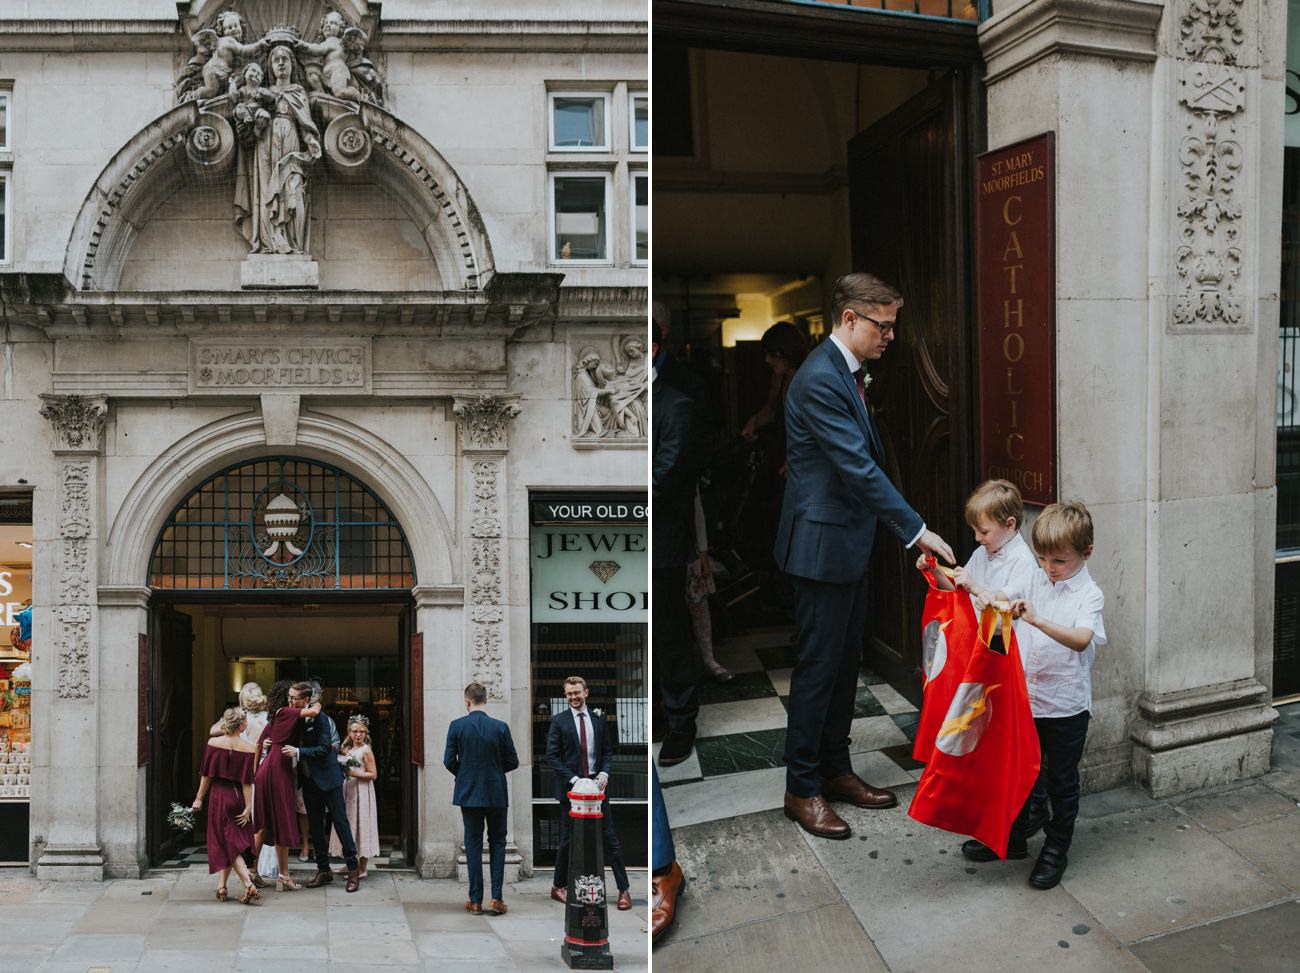 Weeding guests outside St Mary Moorfields Church in London.